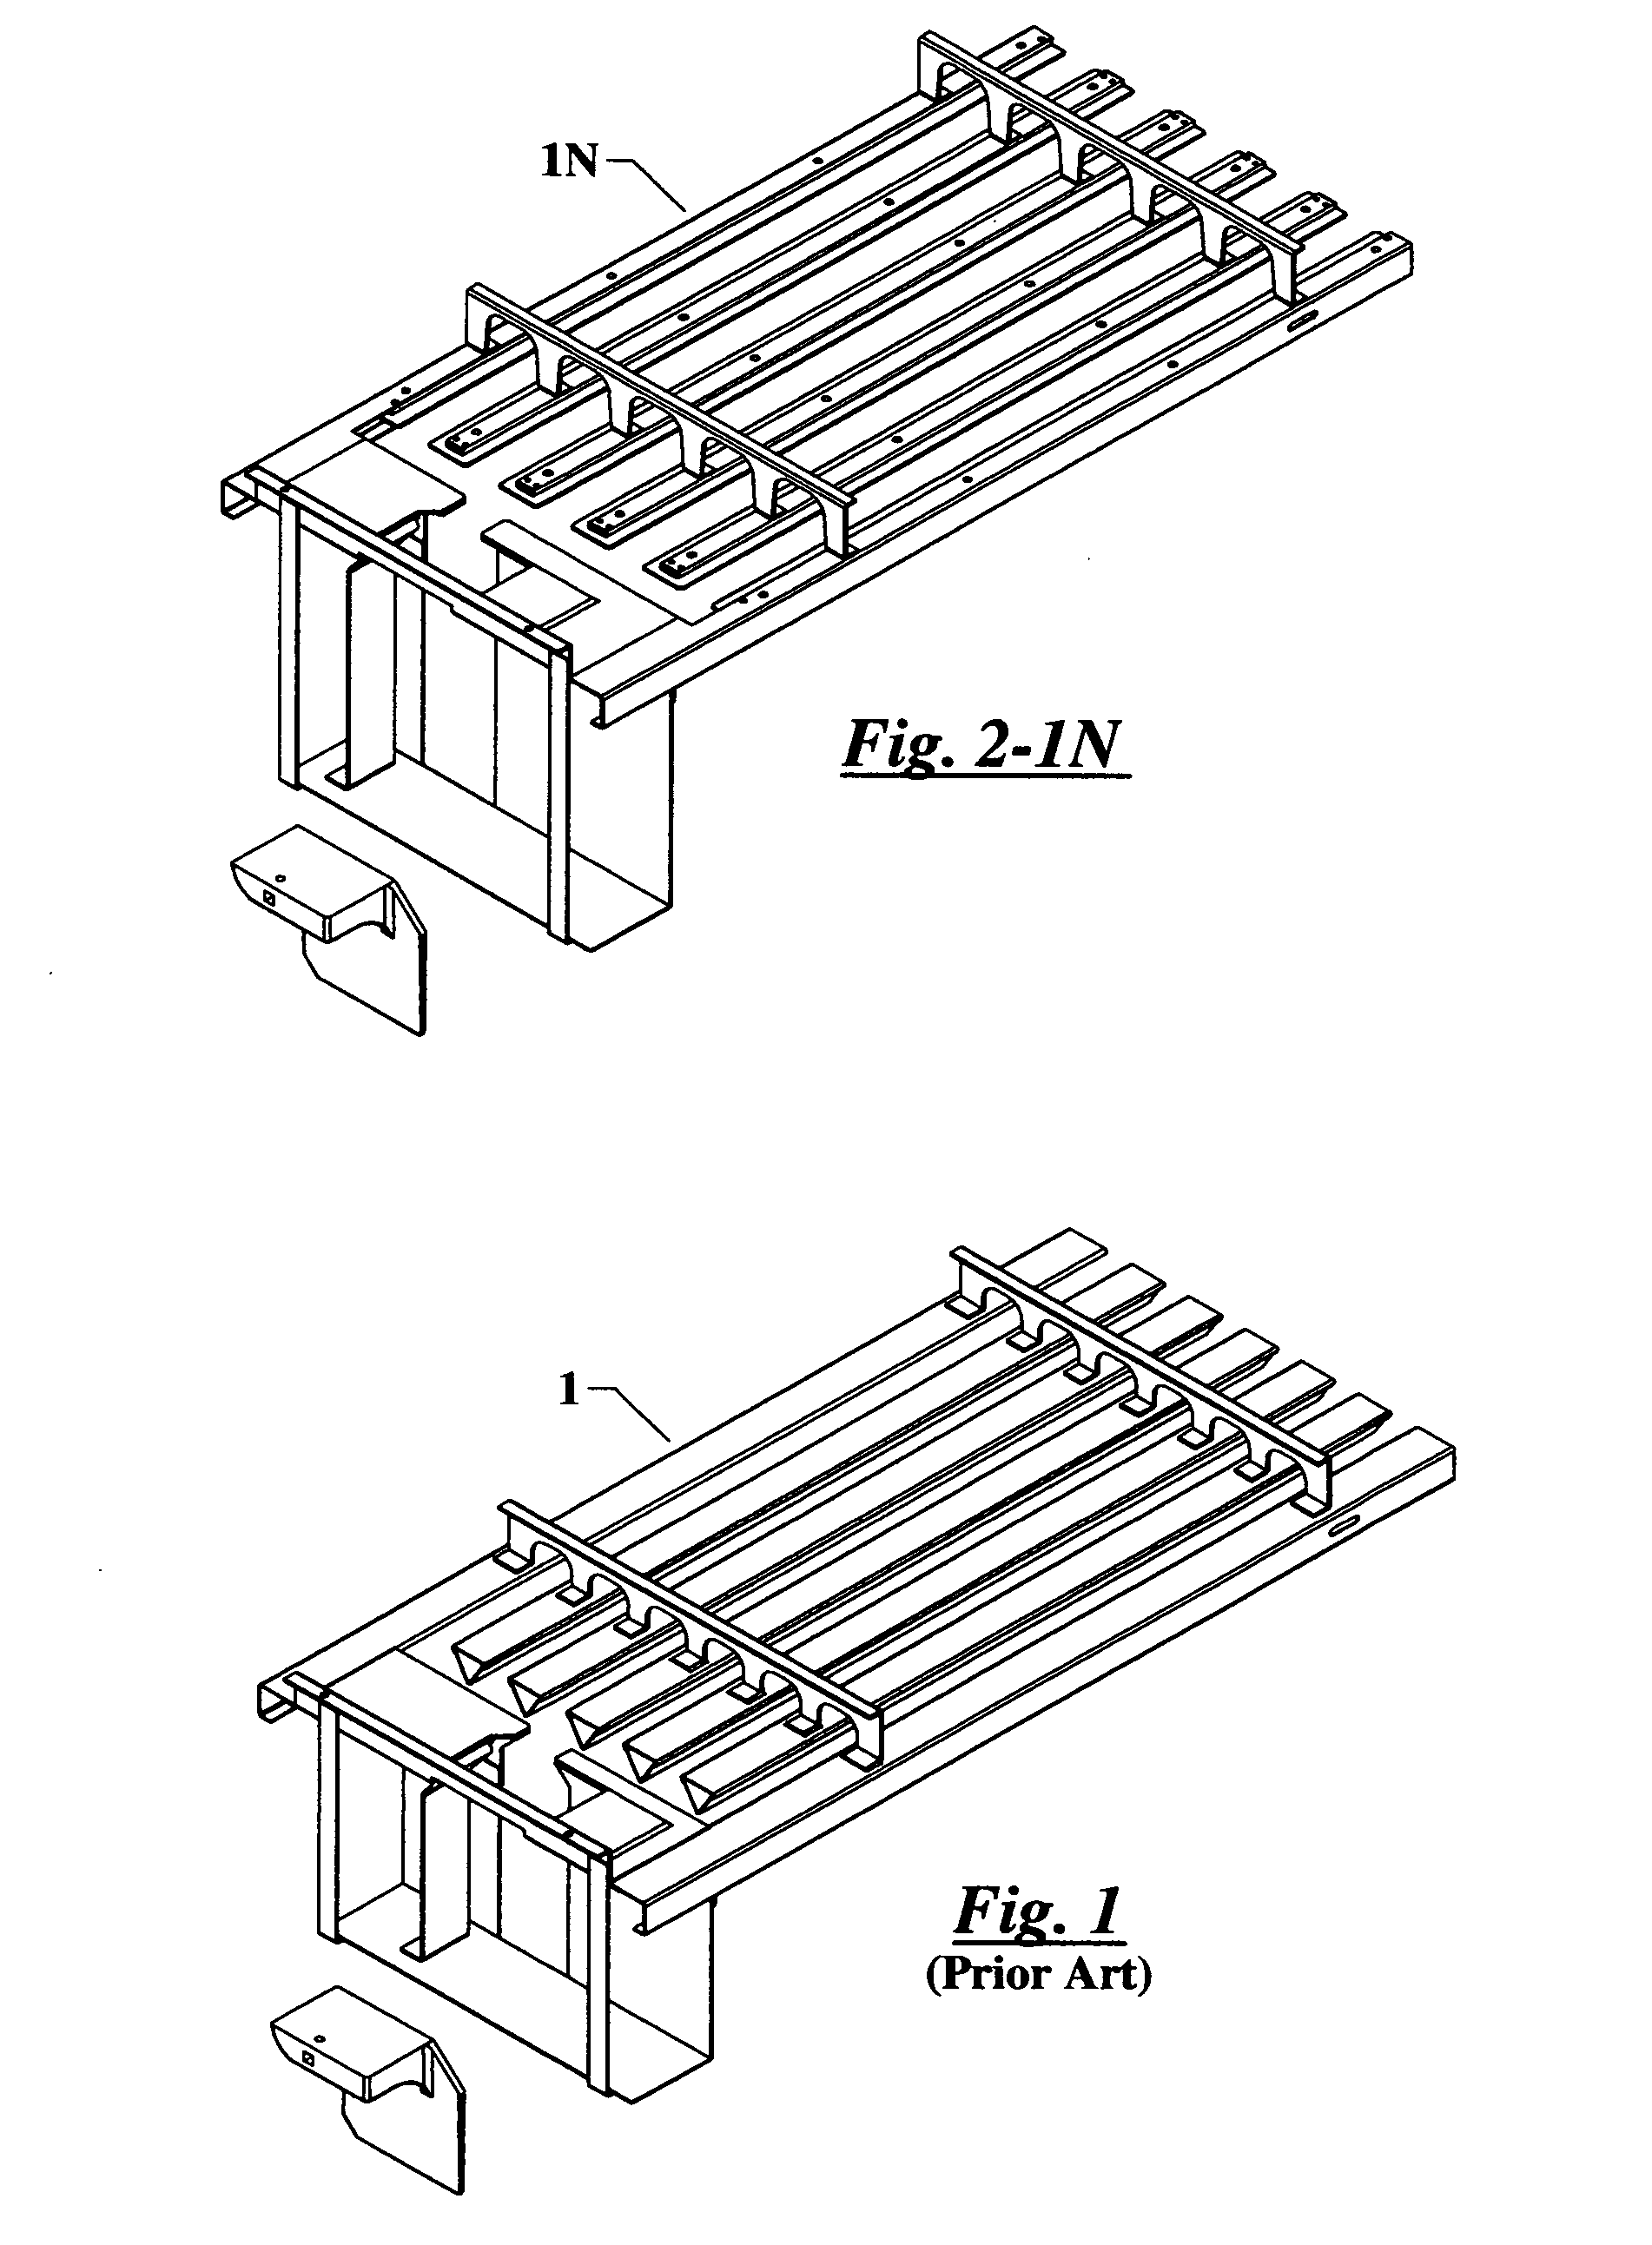 Interchangeable and changeable slider blade dispensing apparatus with adjustable saw tooth trough tray